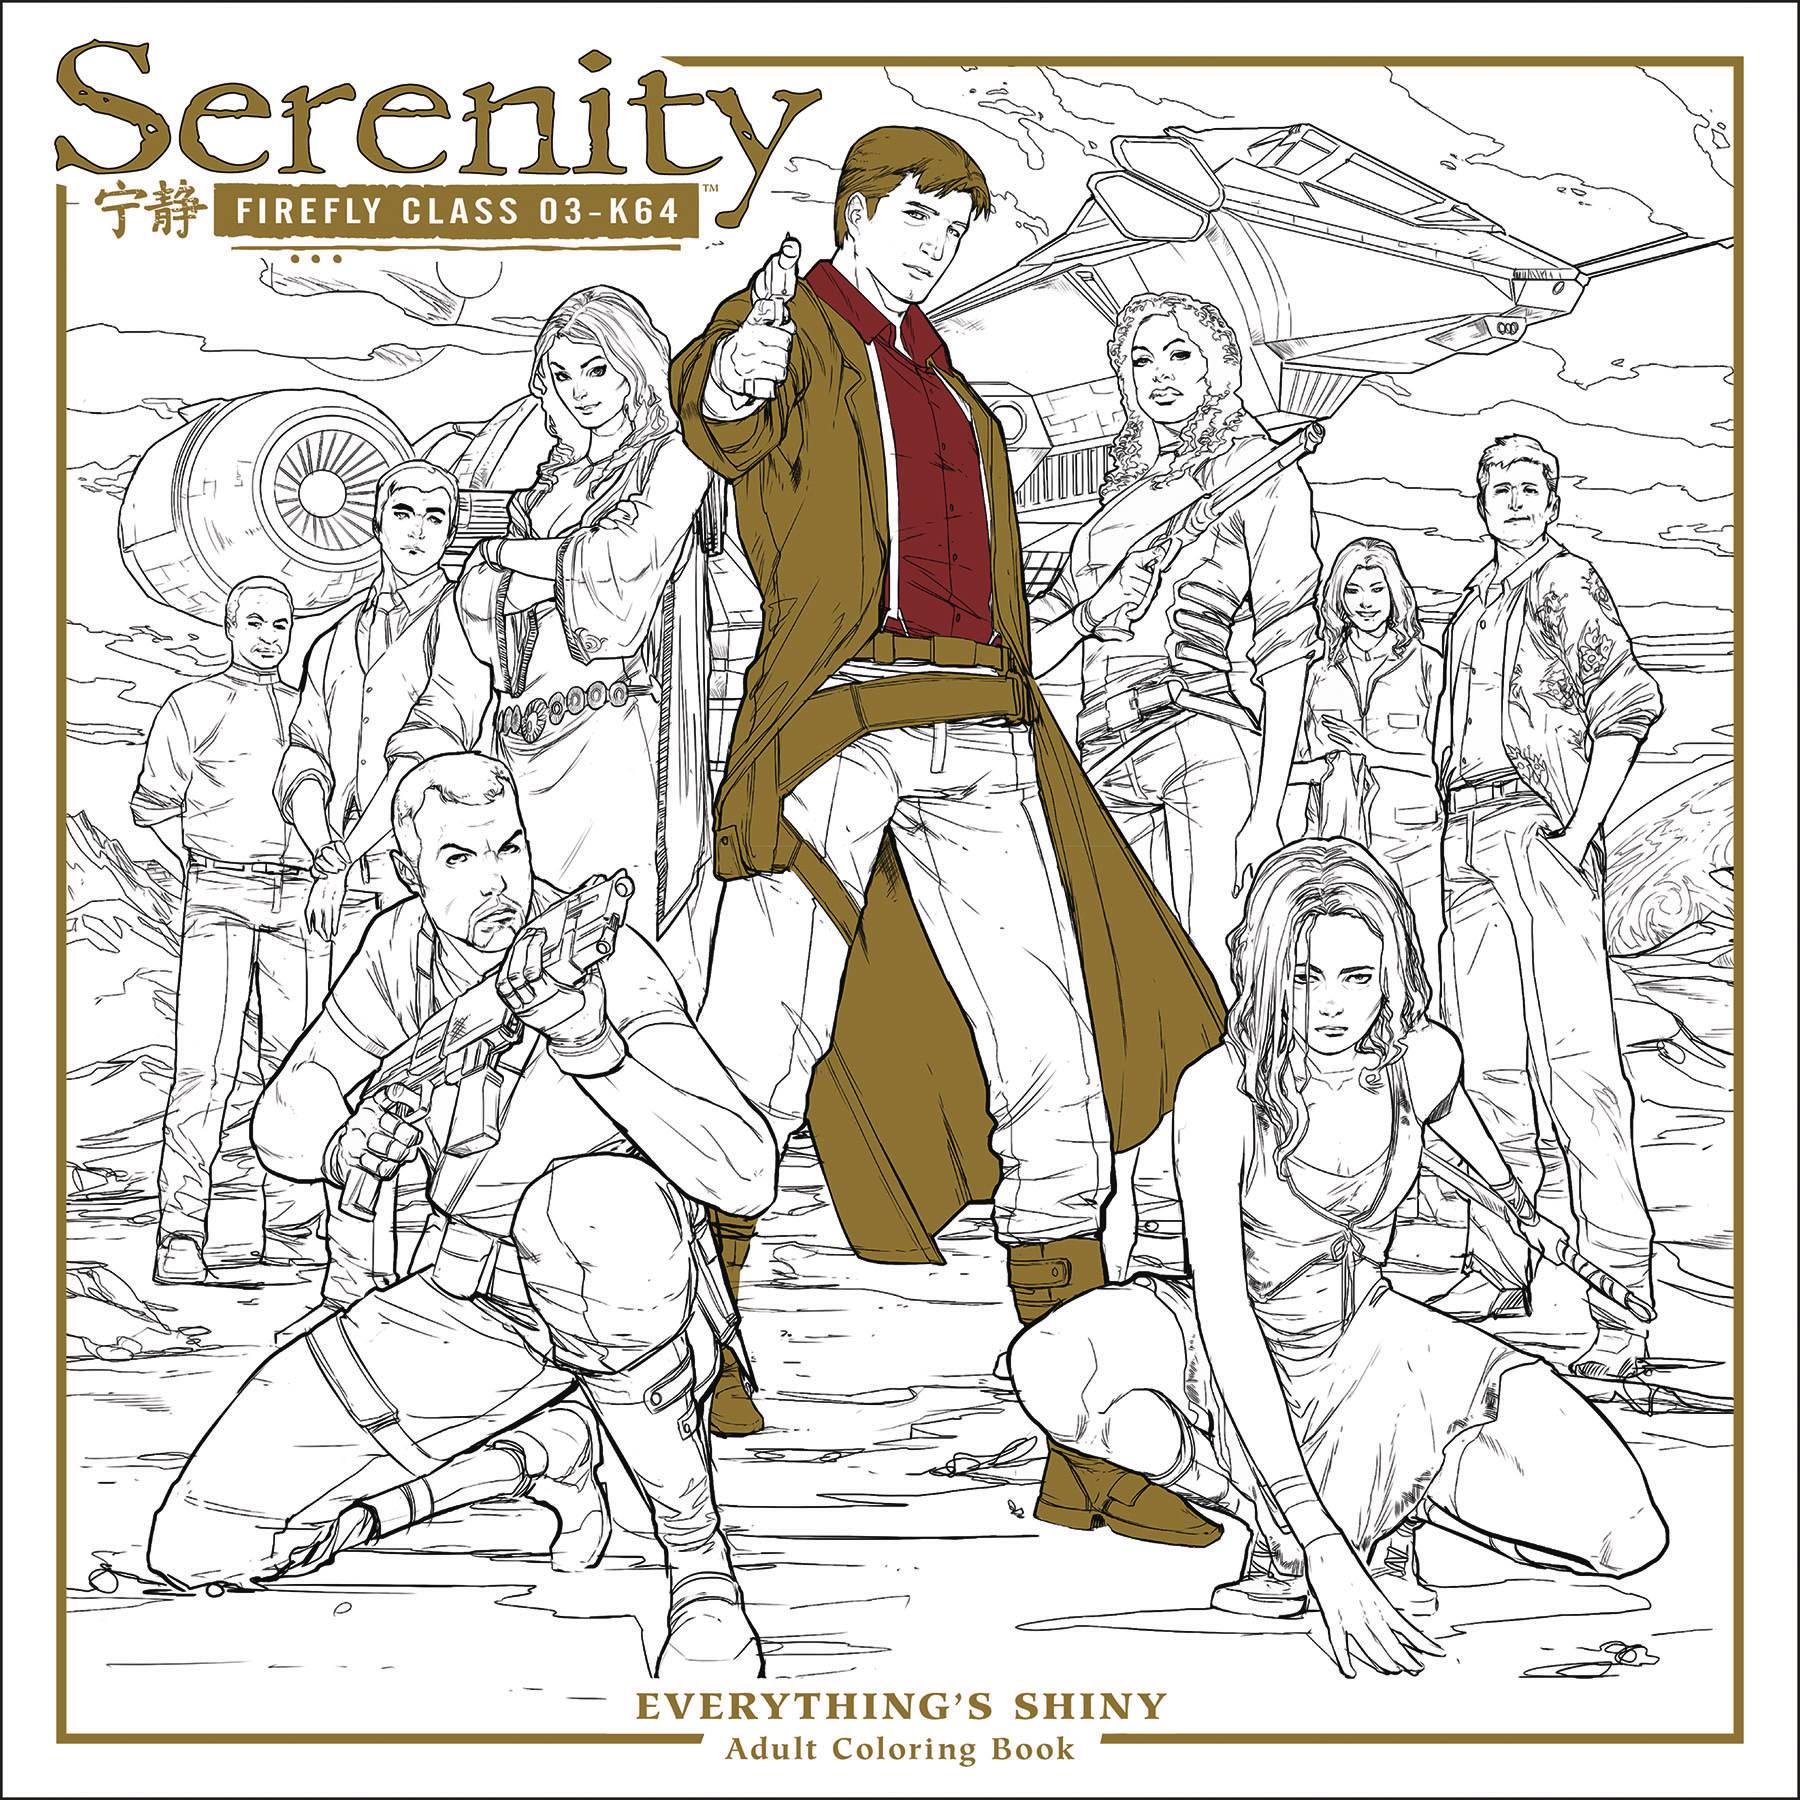 Serenity Everythings Shiny Adult Coloring Book Graphic Novel